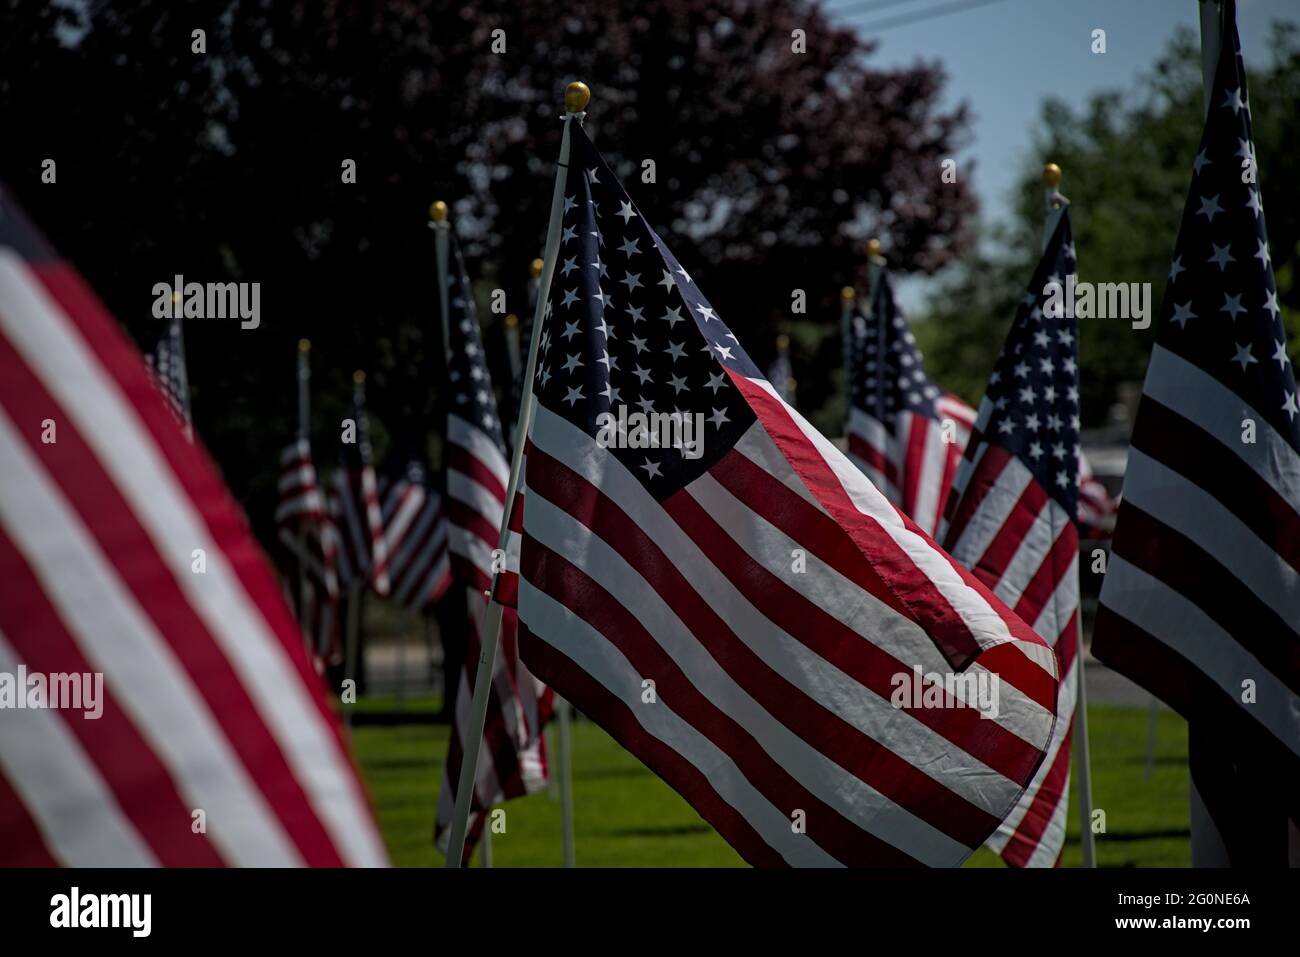 American flags fly wave in memorium honor of freedom veterans soldiers fallen lost during war time in defense of democracy western civilization. Stock Photo